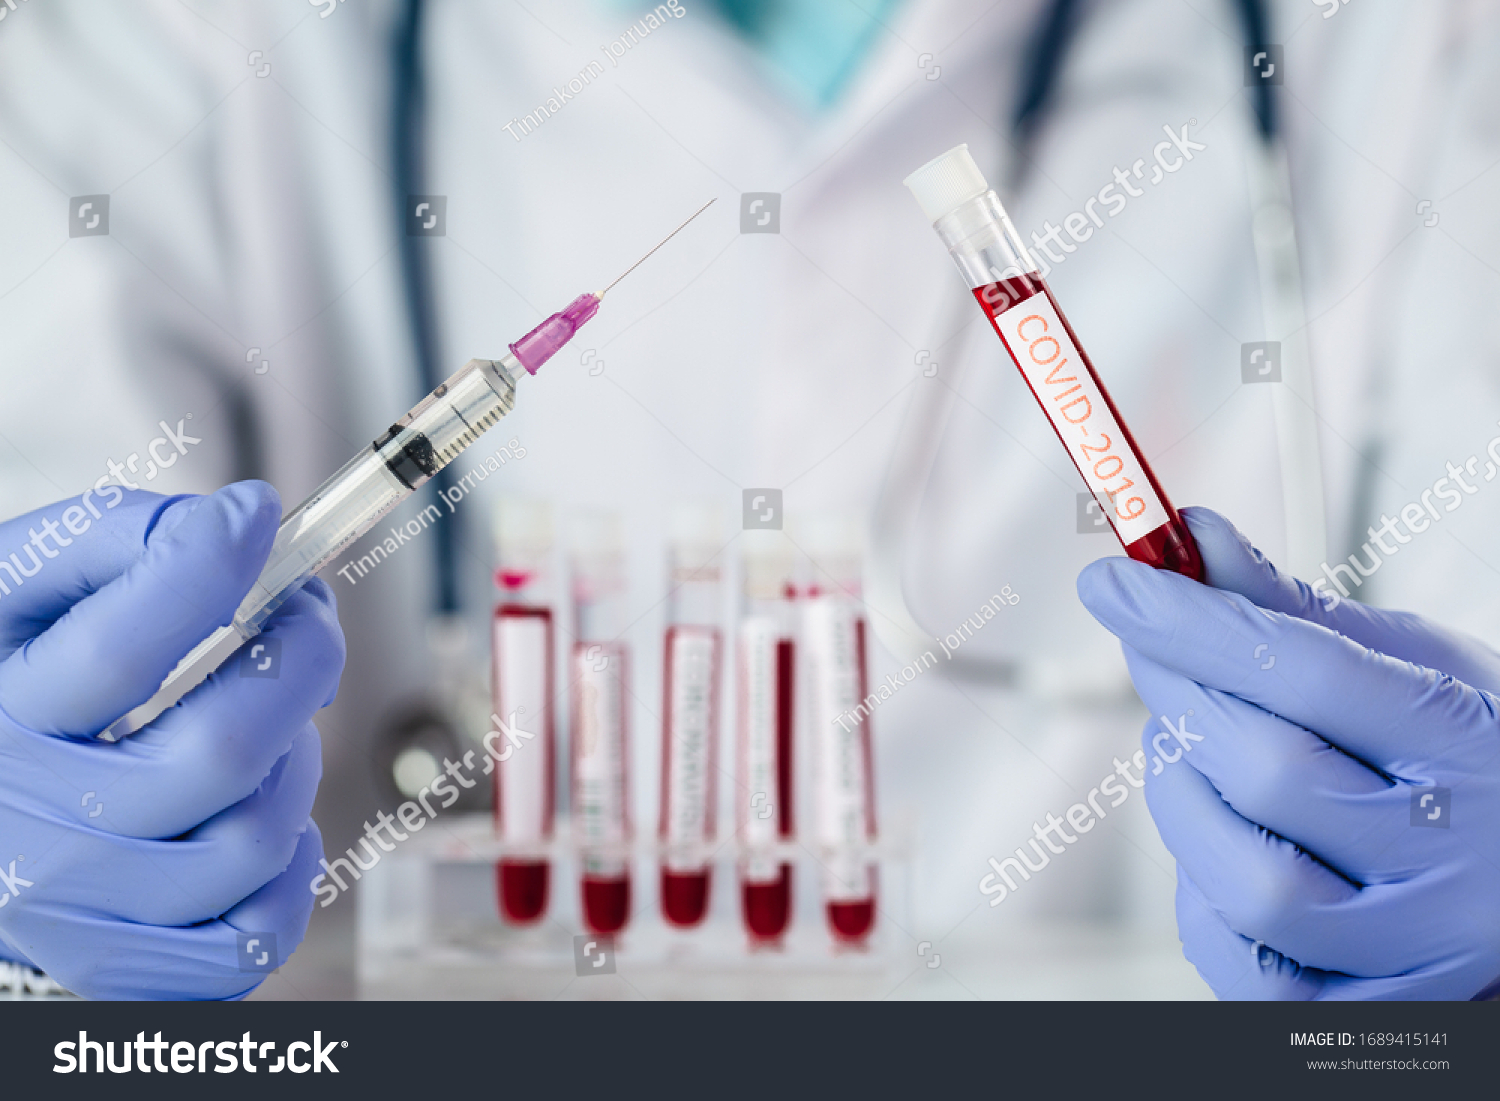 The doctor holding a vaccine to prevent the Covid-19 virus and test tube with blood sample for COVID-19 test, novel coronavirus 2019.  #1689415141